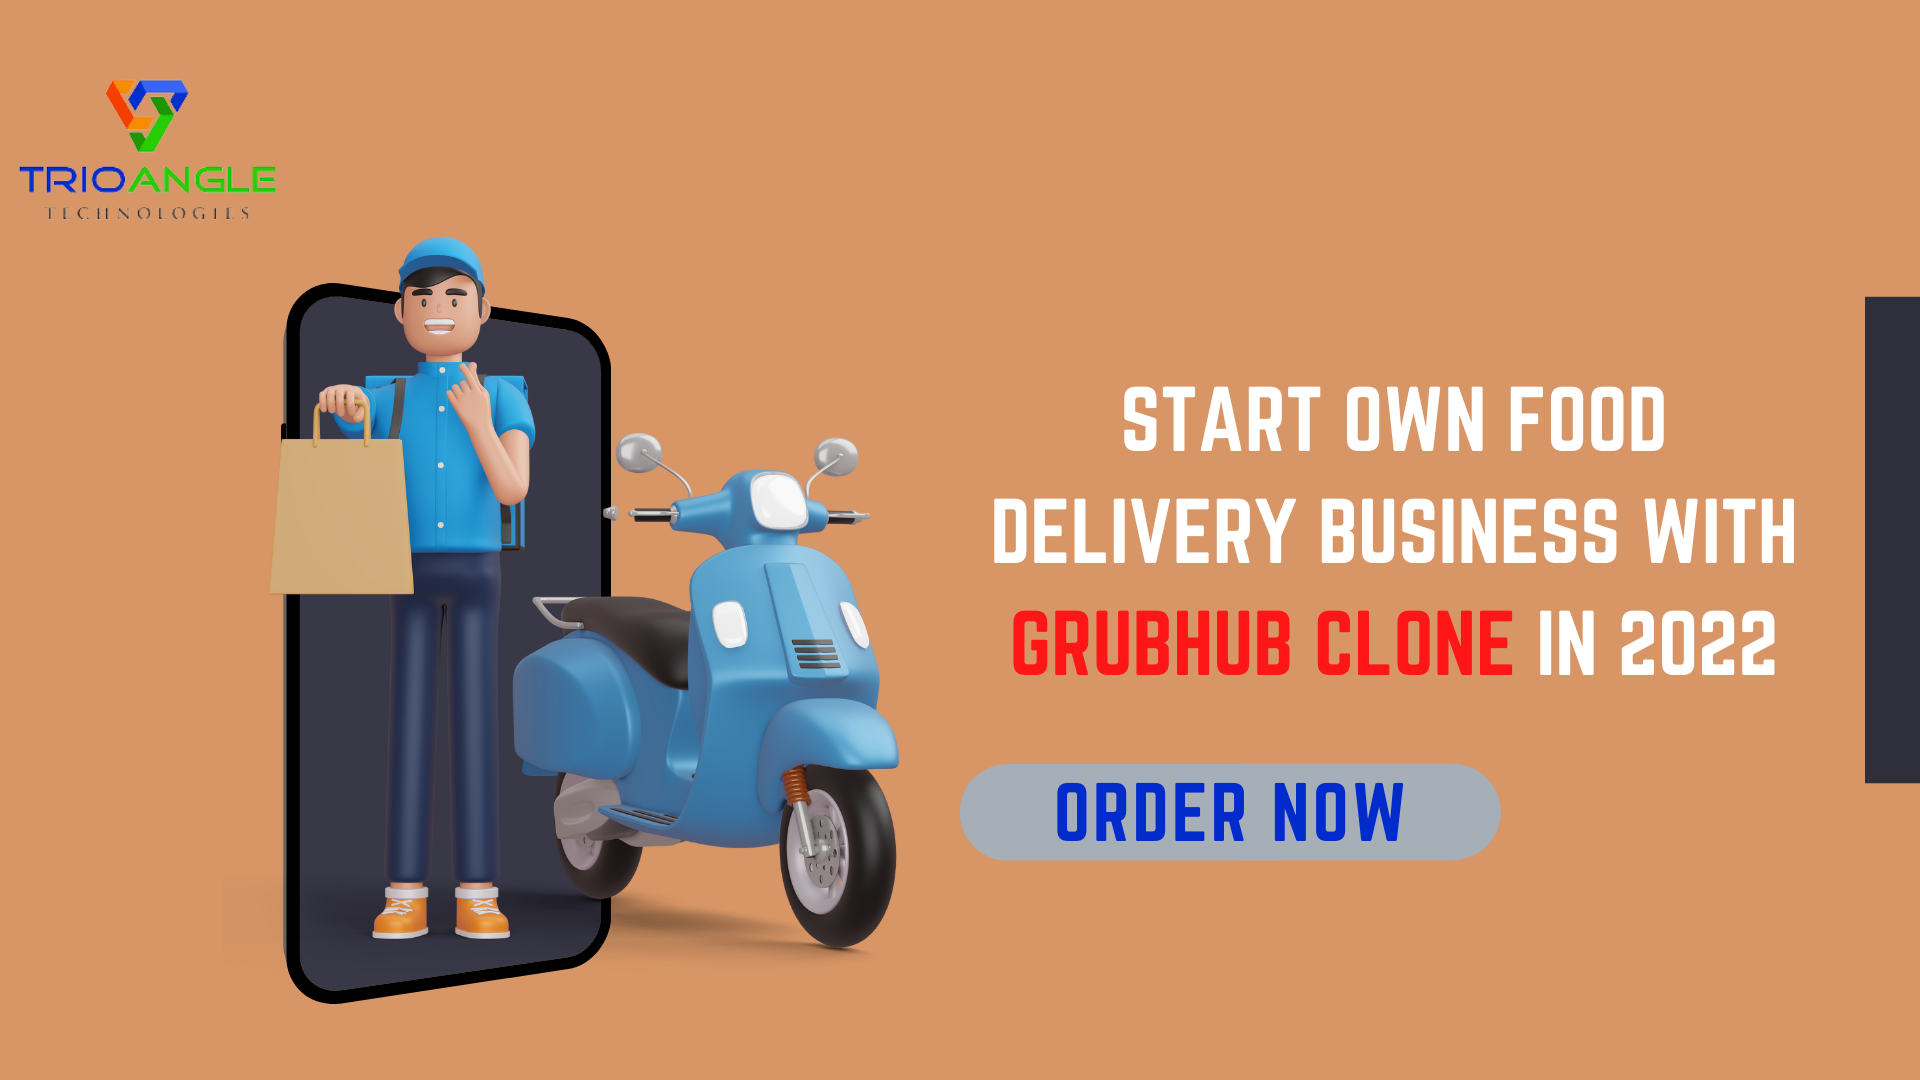 Article about Start Own Food Delivery Business With Grubhub Clone in 2022